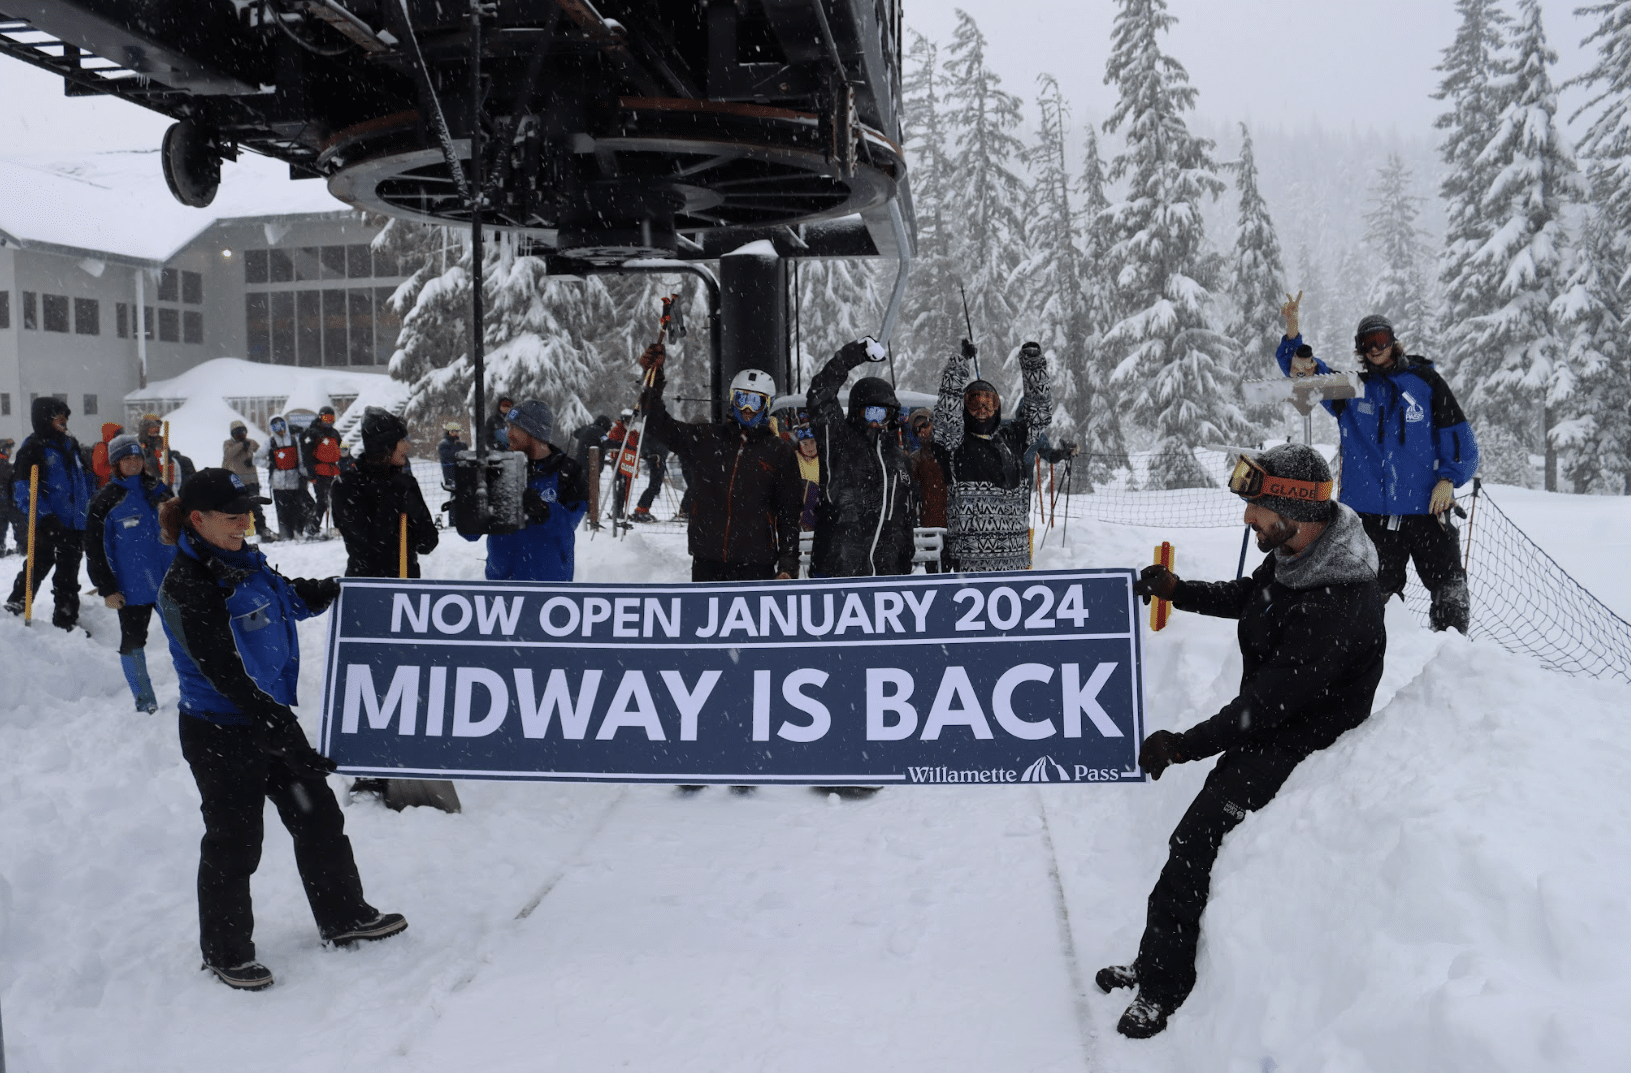 Midway chairlift is BACK!